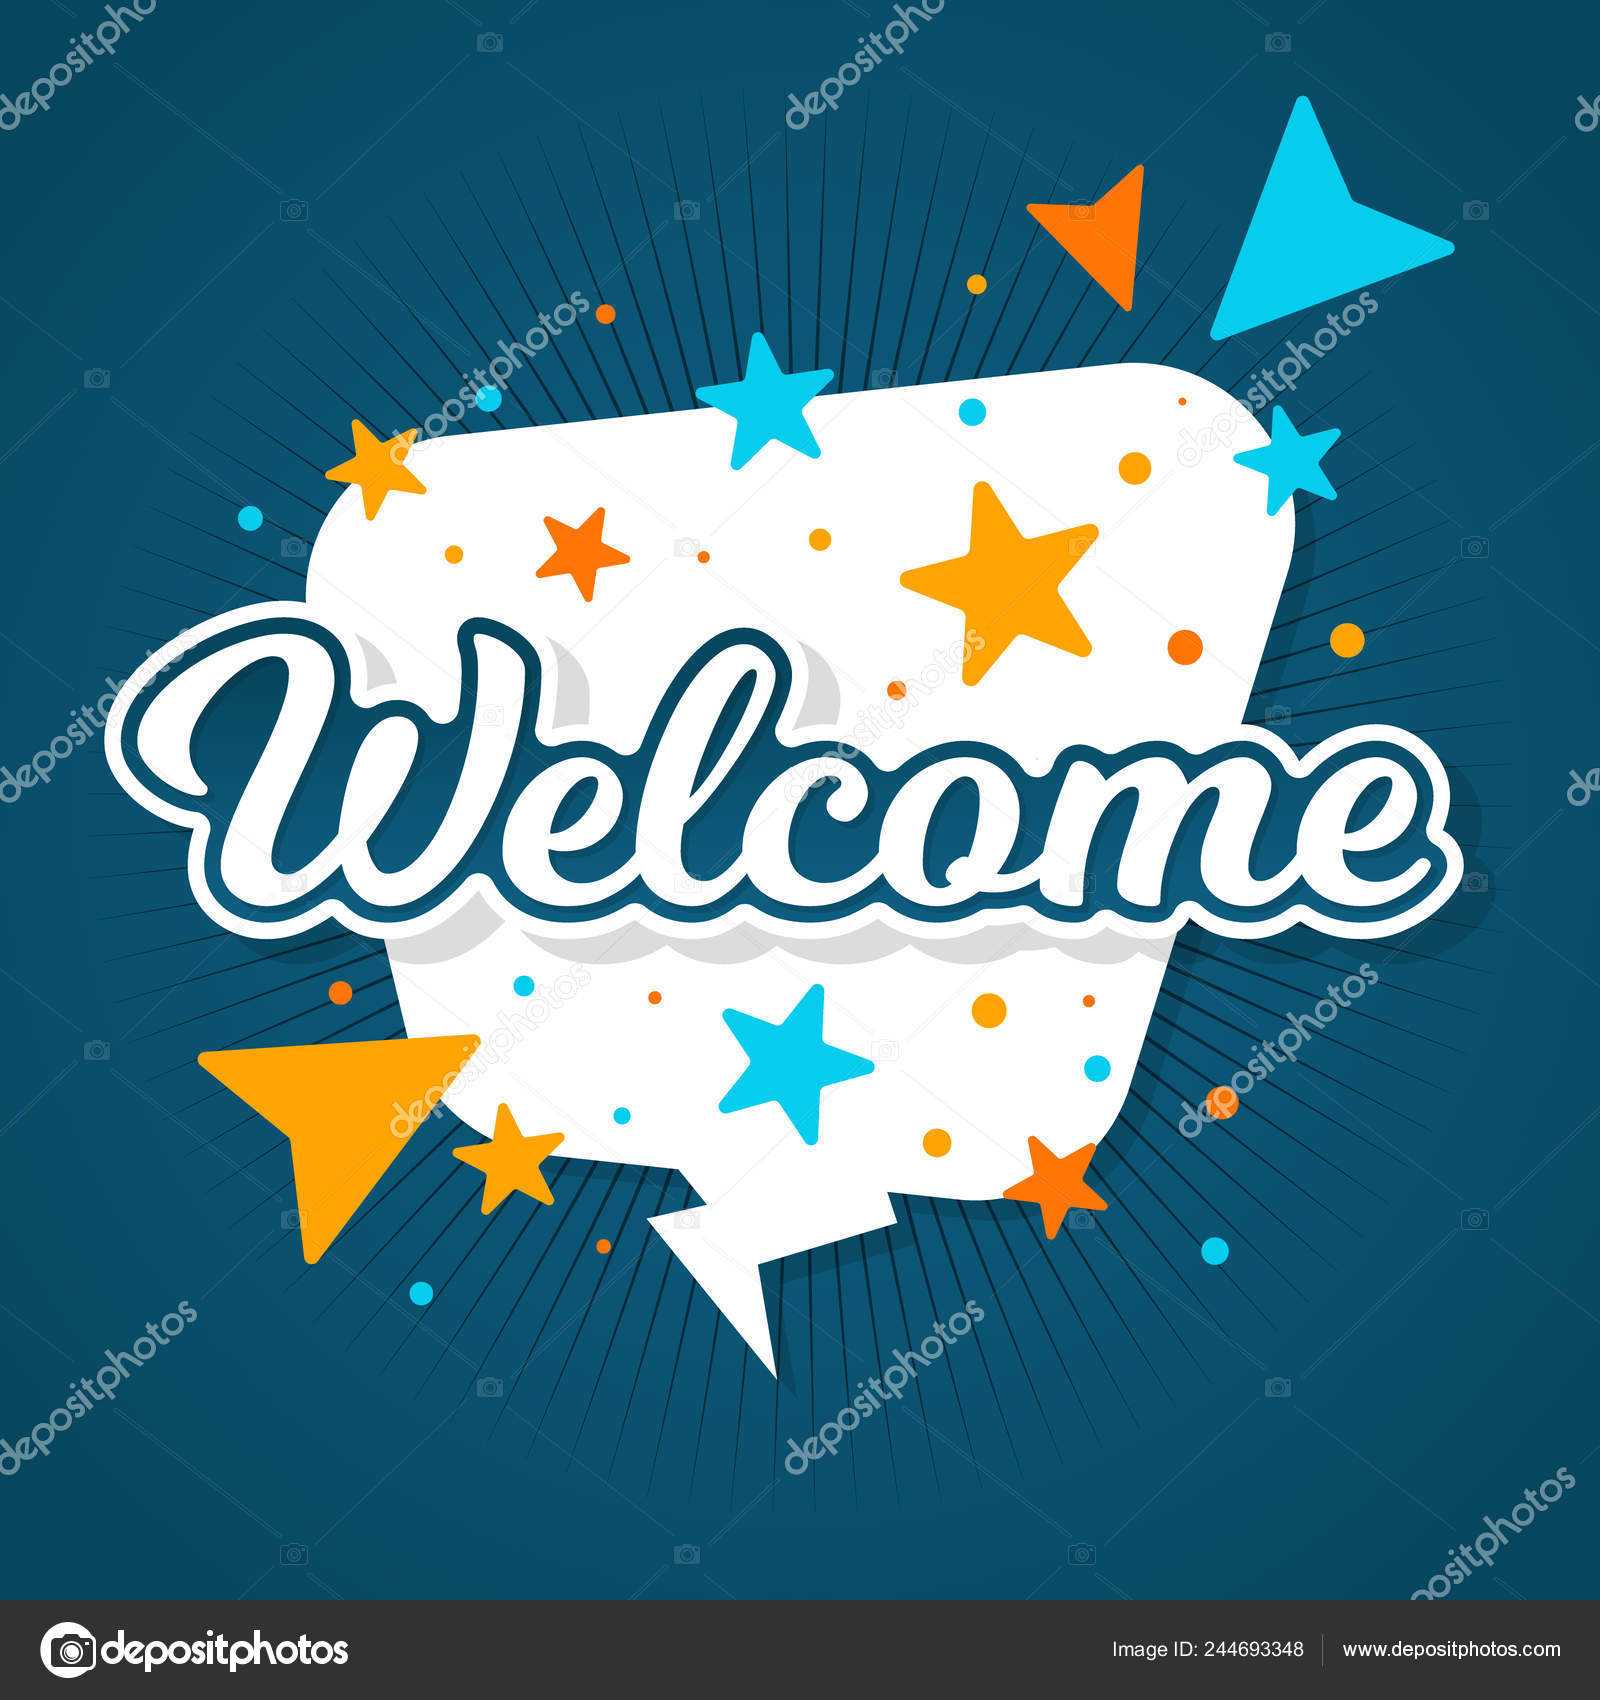 Welcome Letters Banner Flowing Liquid Shapes Template Design Throughout Welcome Banner Template